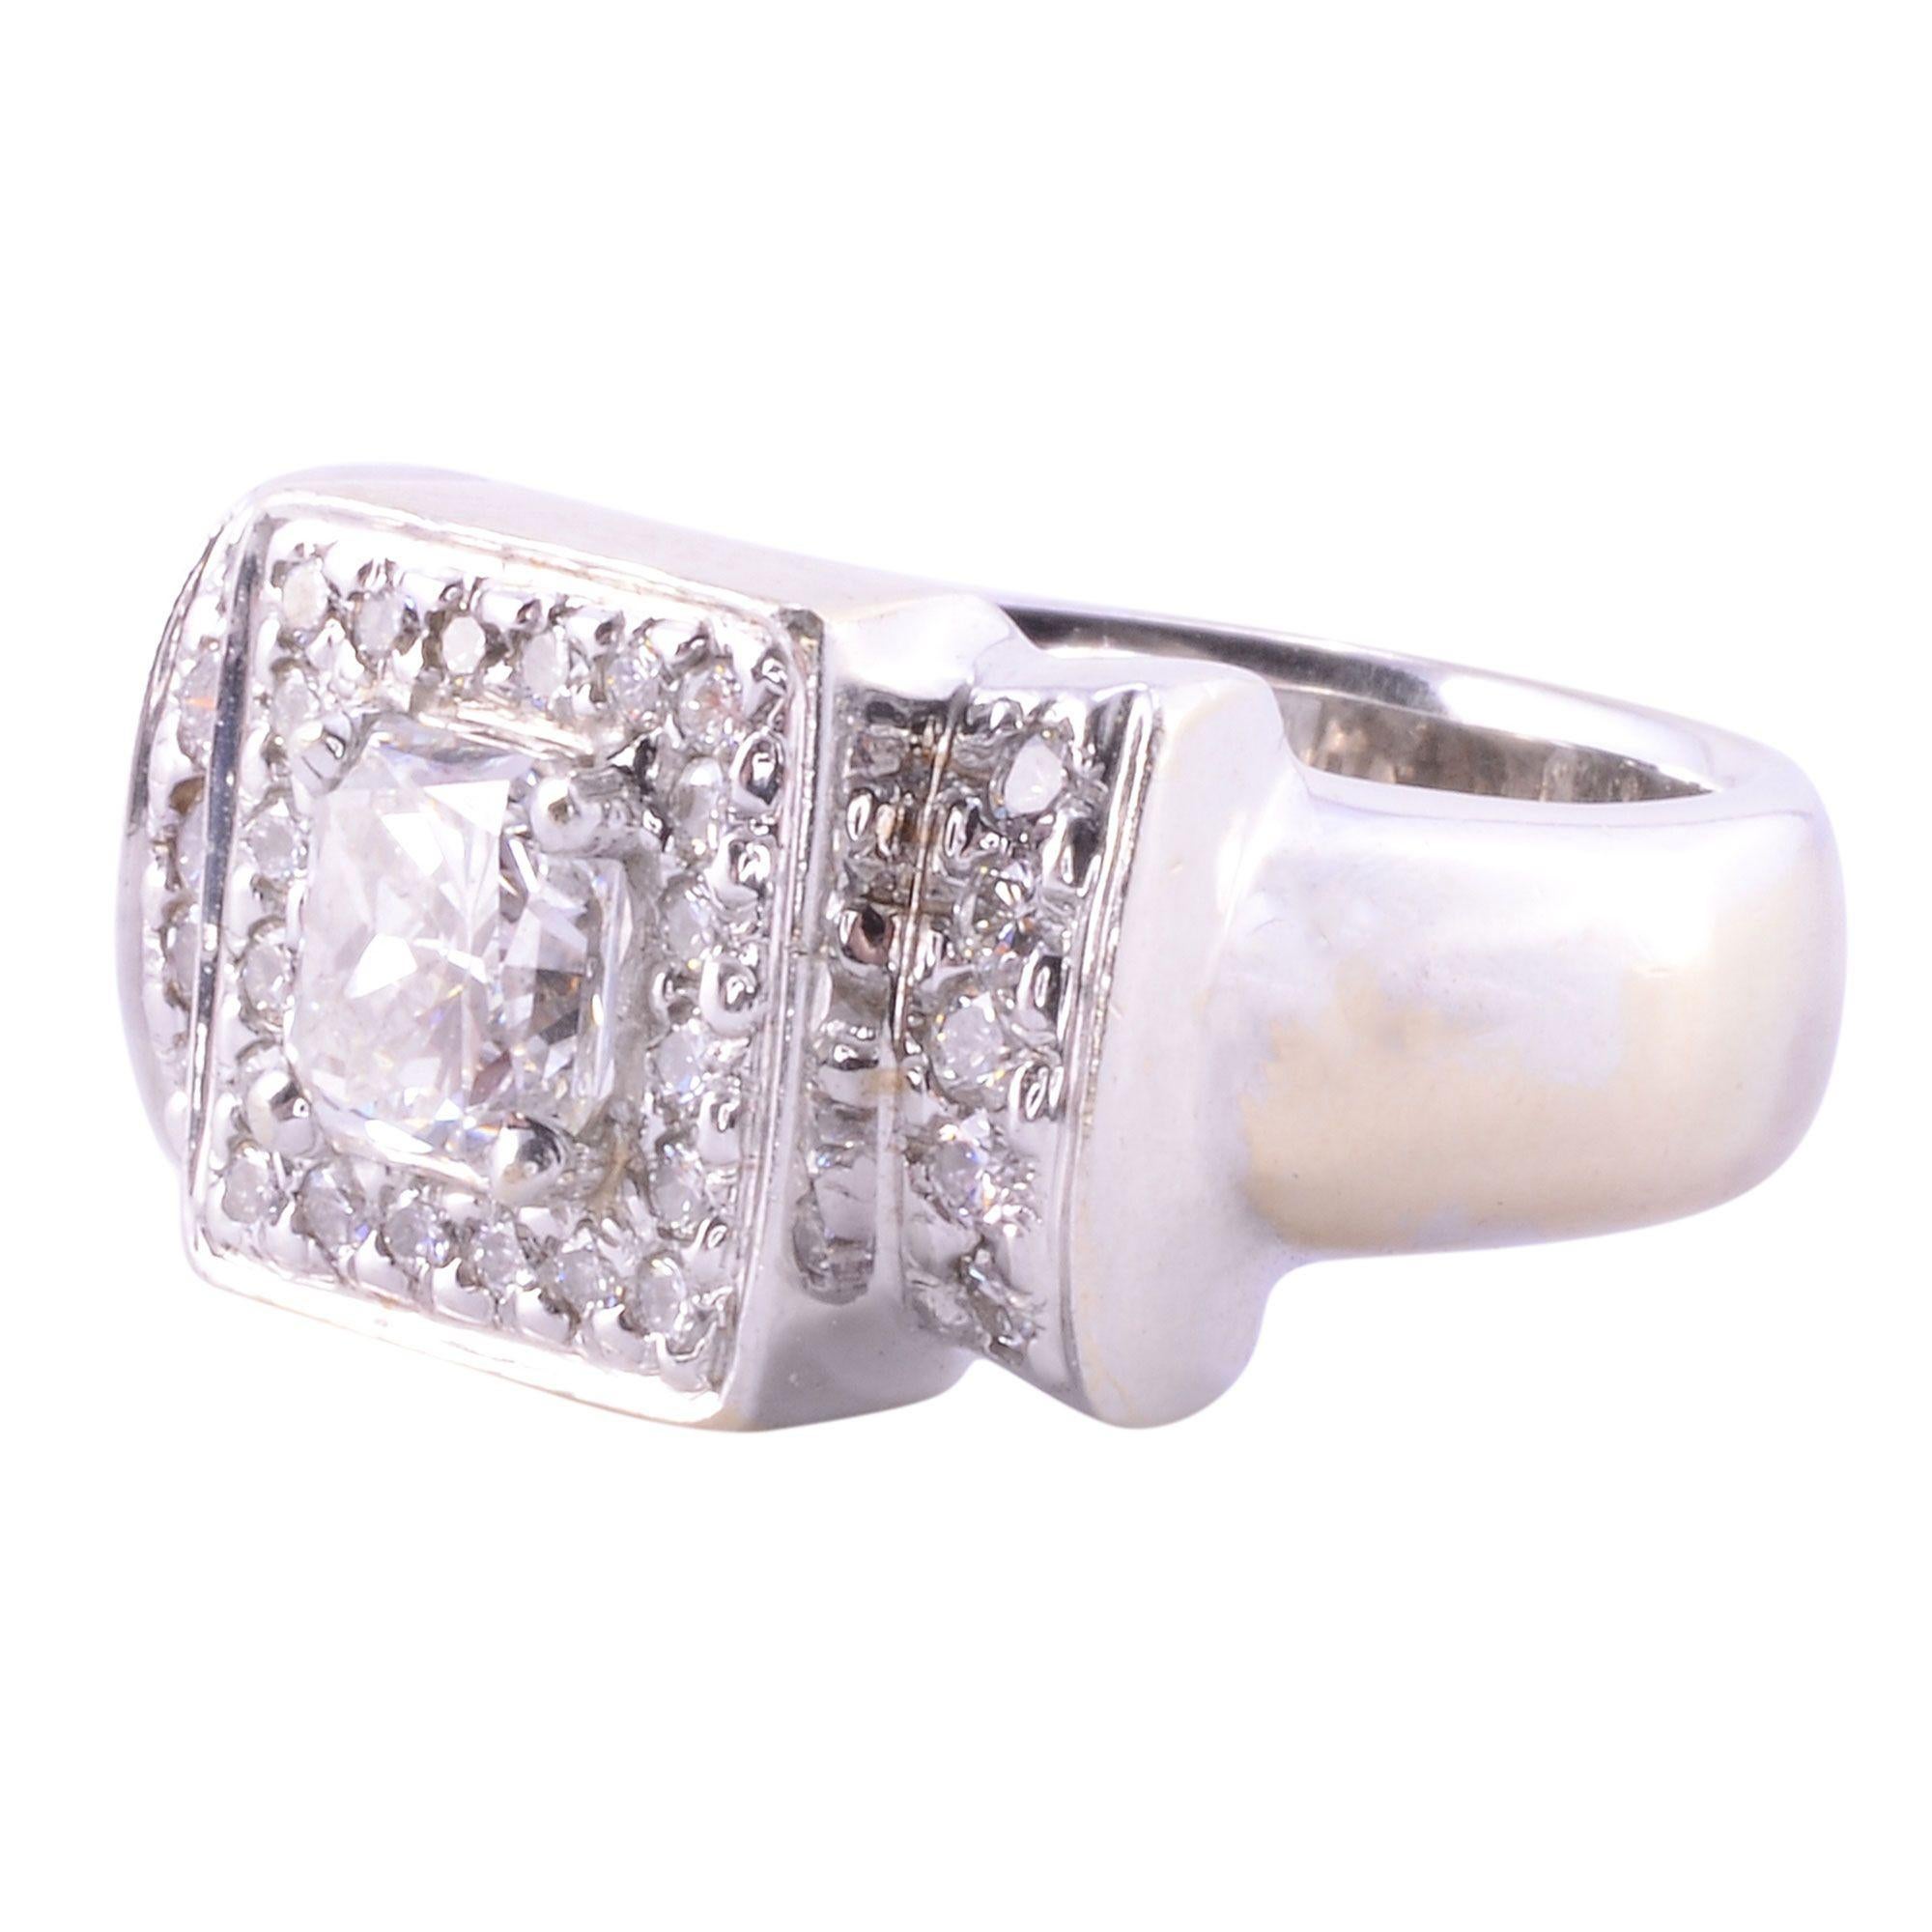 Estate 1.08 carat radiant cut VVS2 diamond ring. This 14 karat white gold fashion cluster ring is prong set with a center radiant cut diamond at approximately 1.08 carats that has VVS2 clarity and G color. This center diamond is encompassed with a